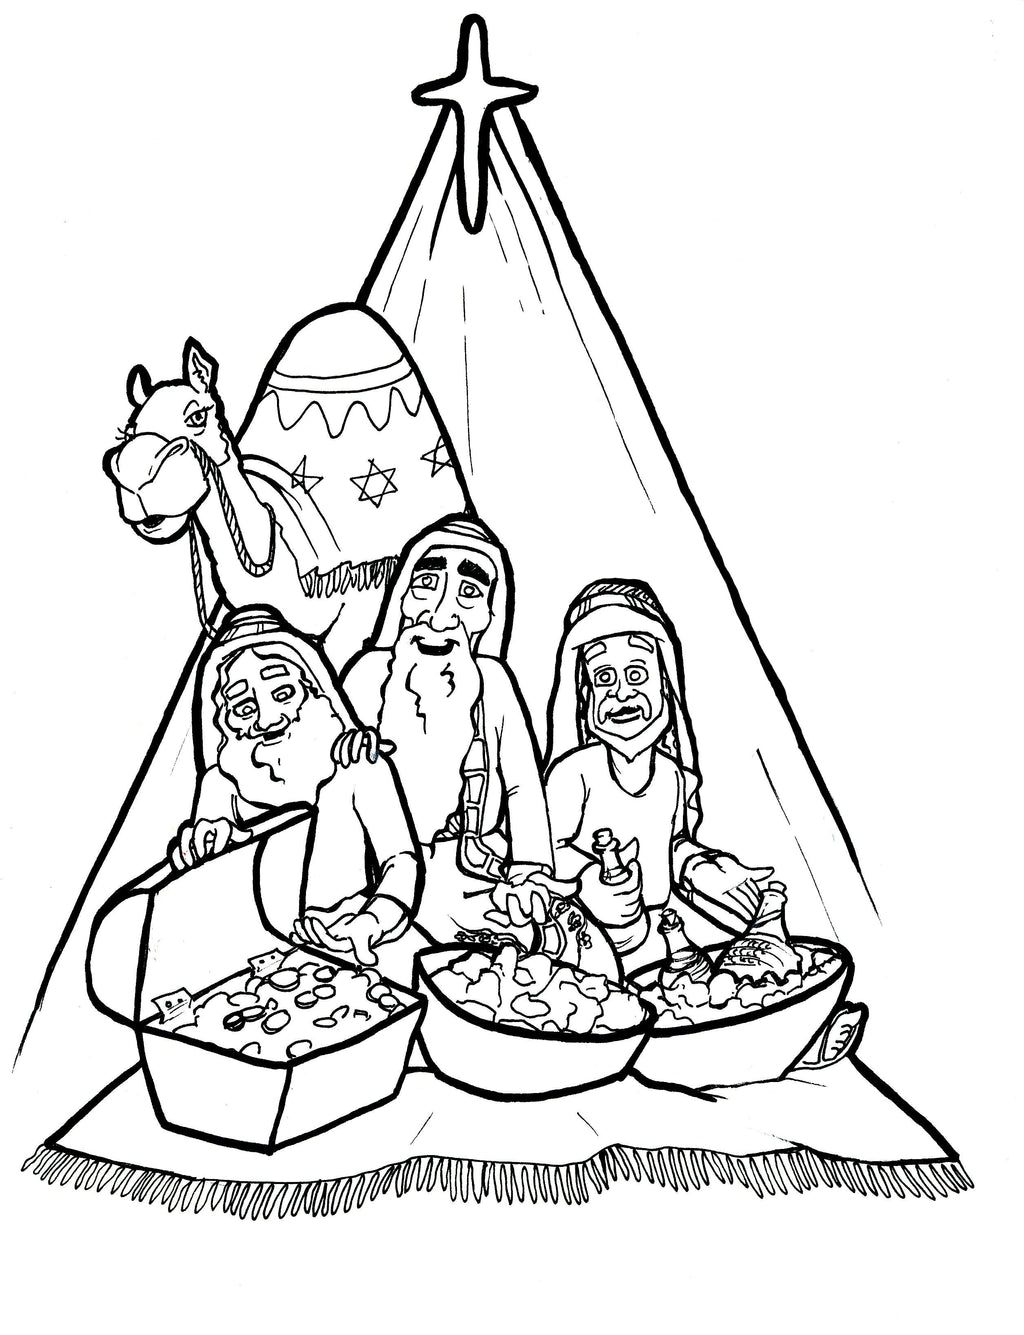 The kings coloring page